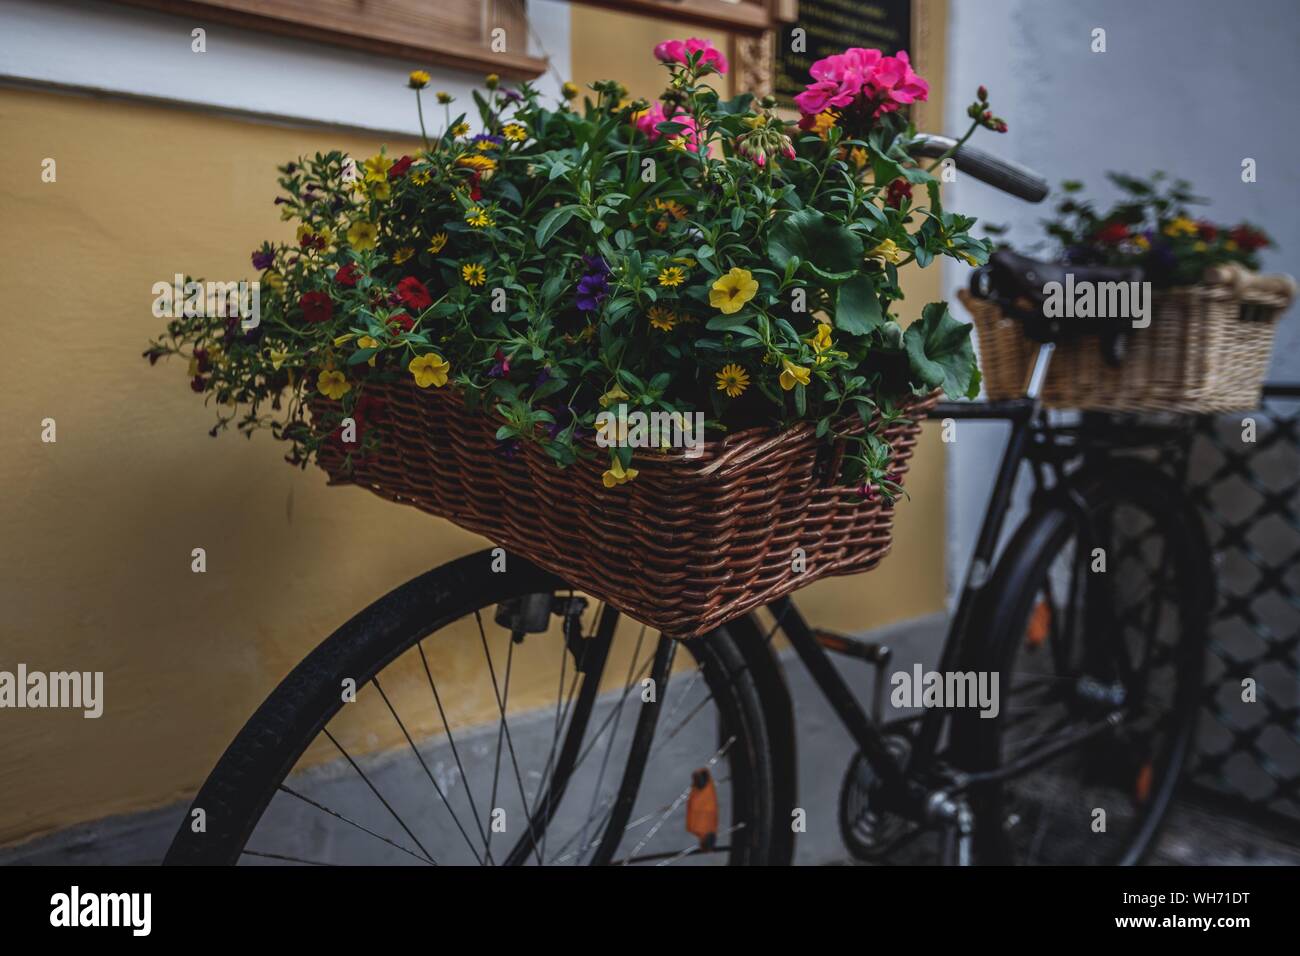 Close-up Of Potted Plant In Basket Stock Photo